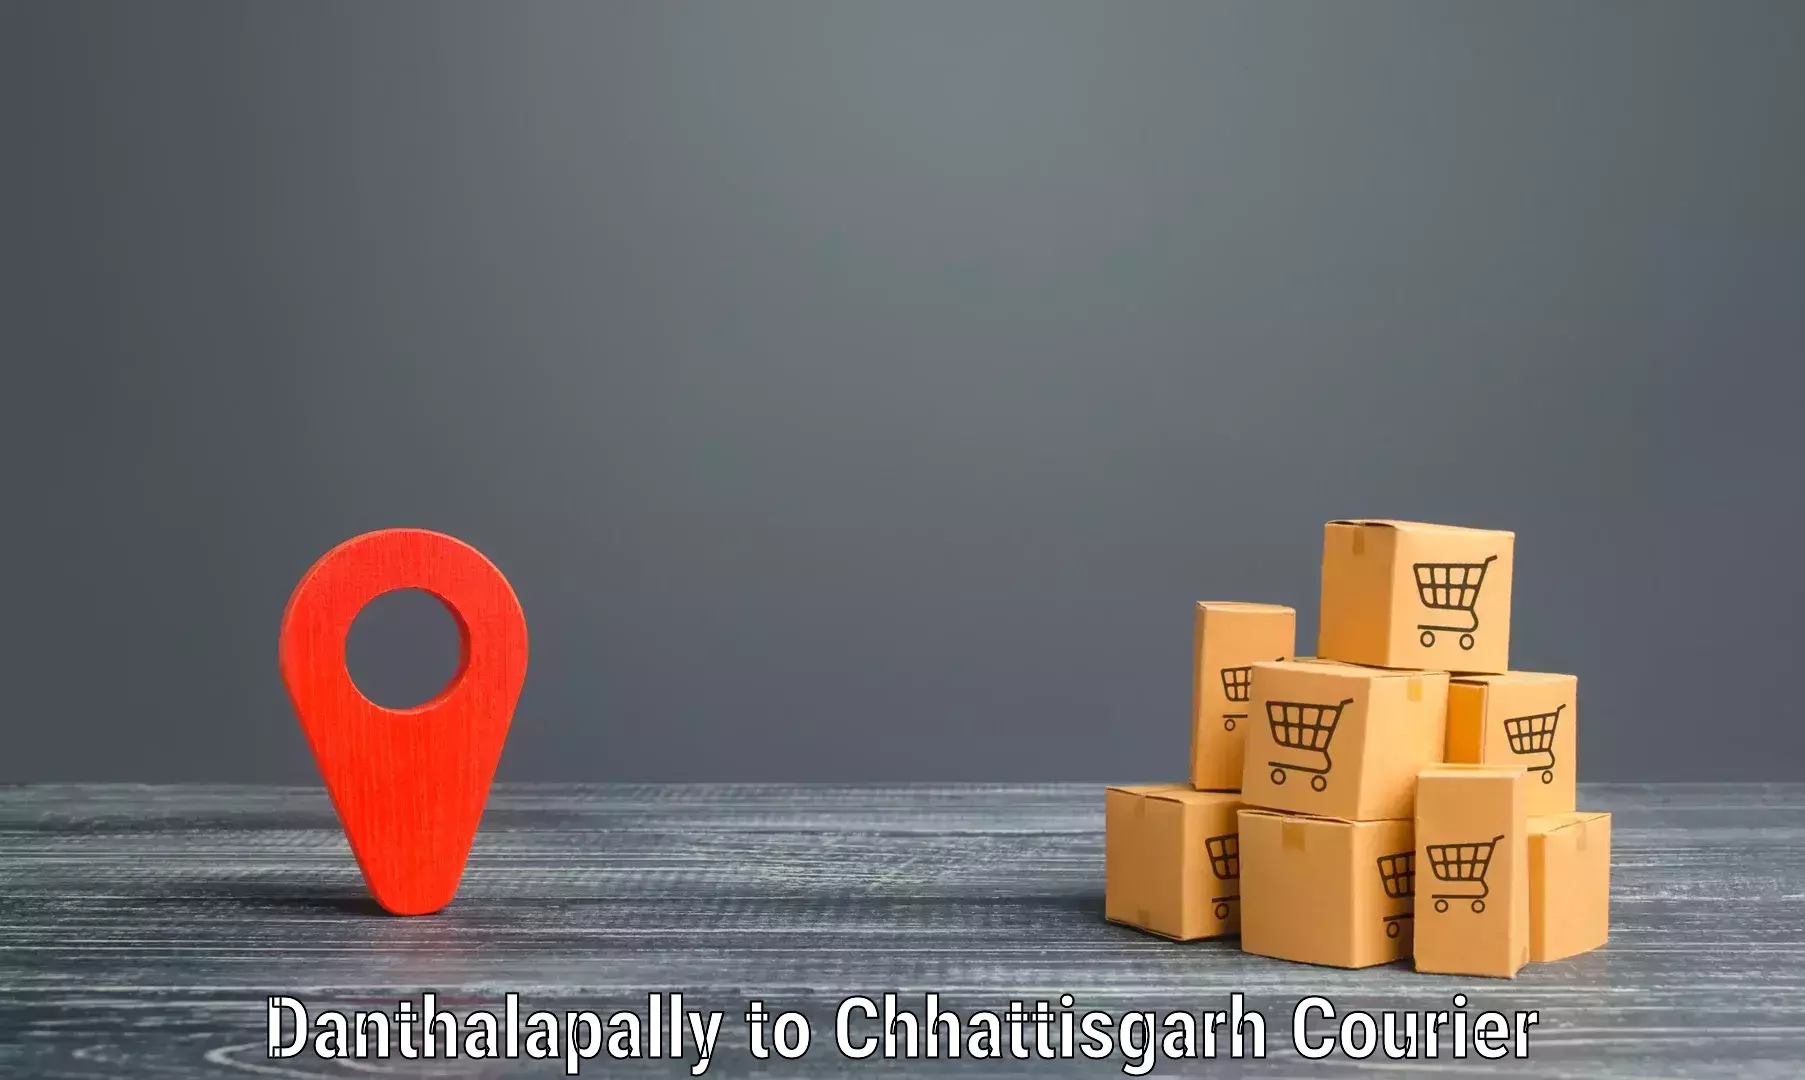 Advanced delivery network in Danthalapally to Raigarh Chhattisgarh